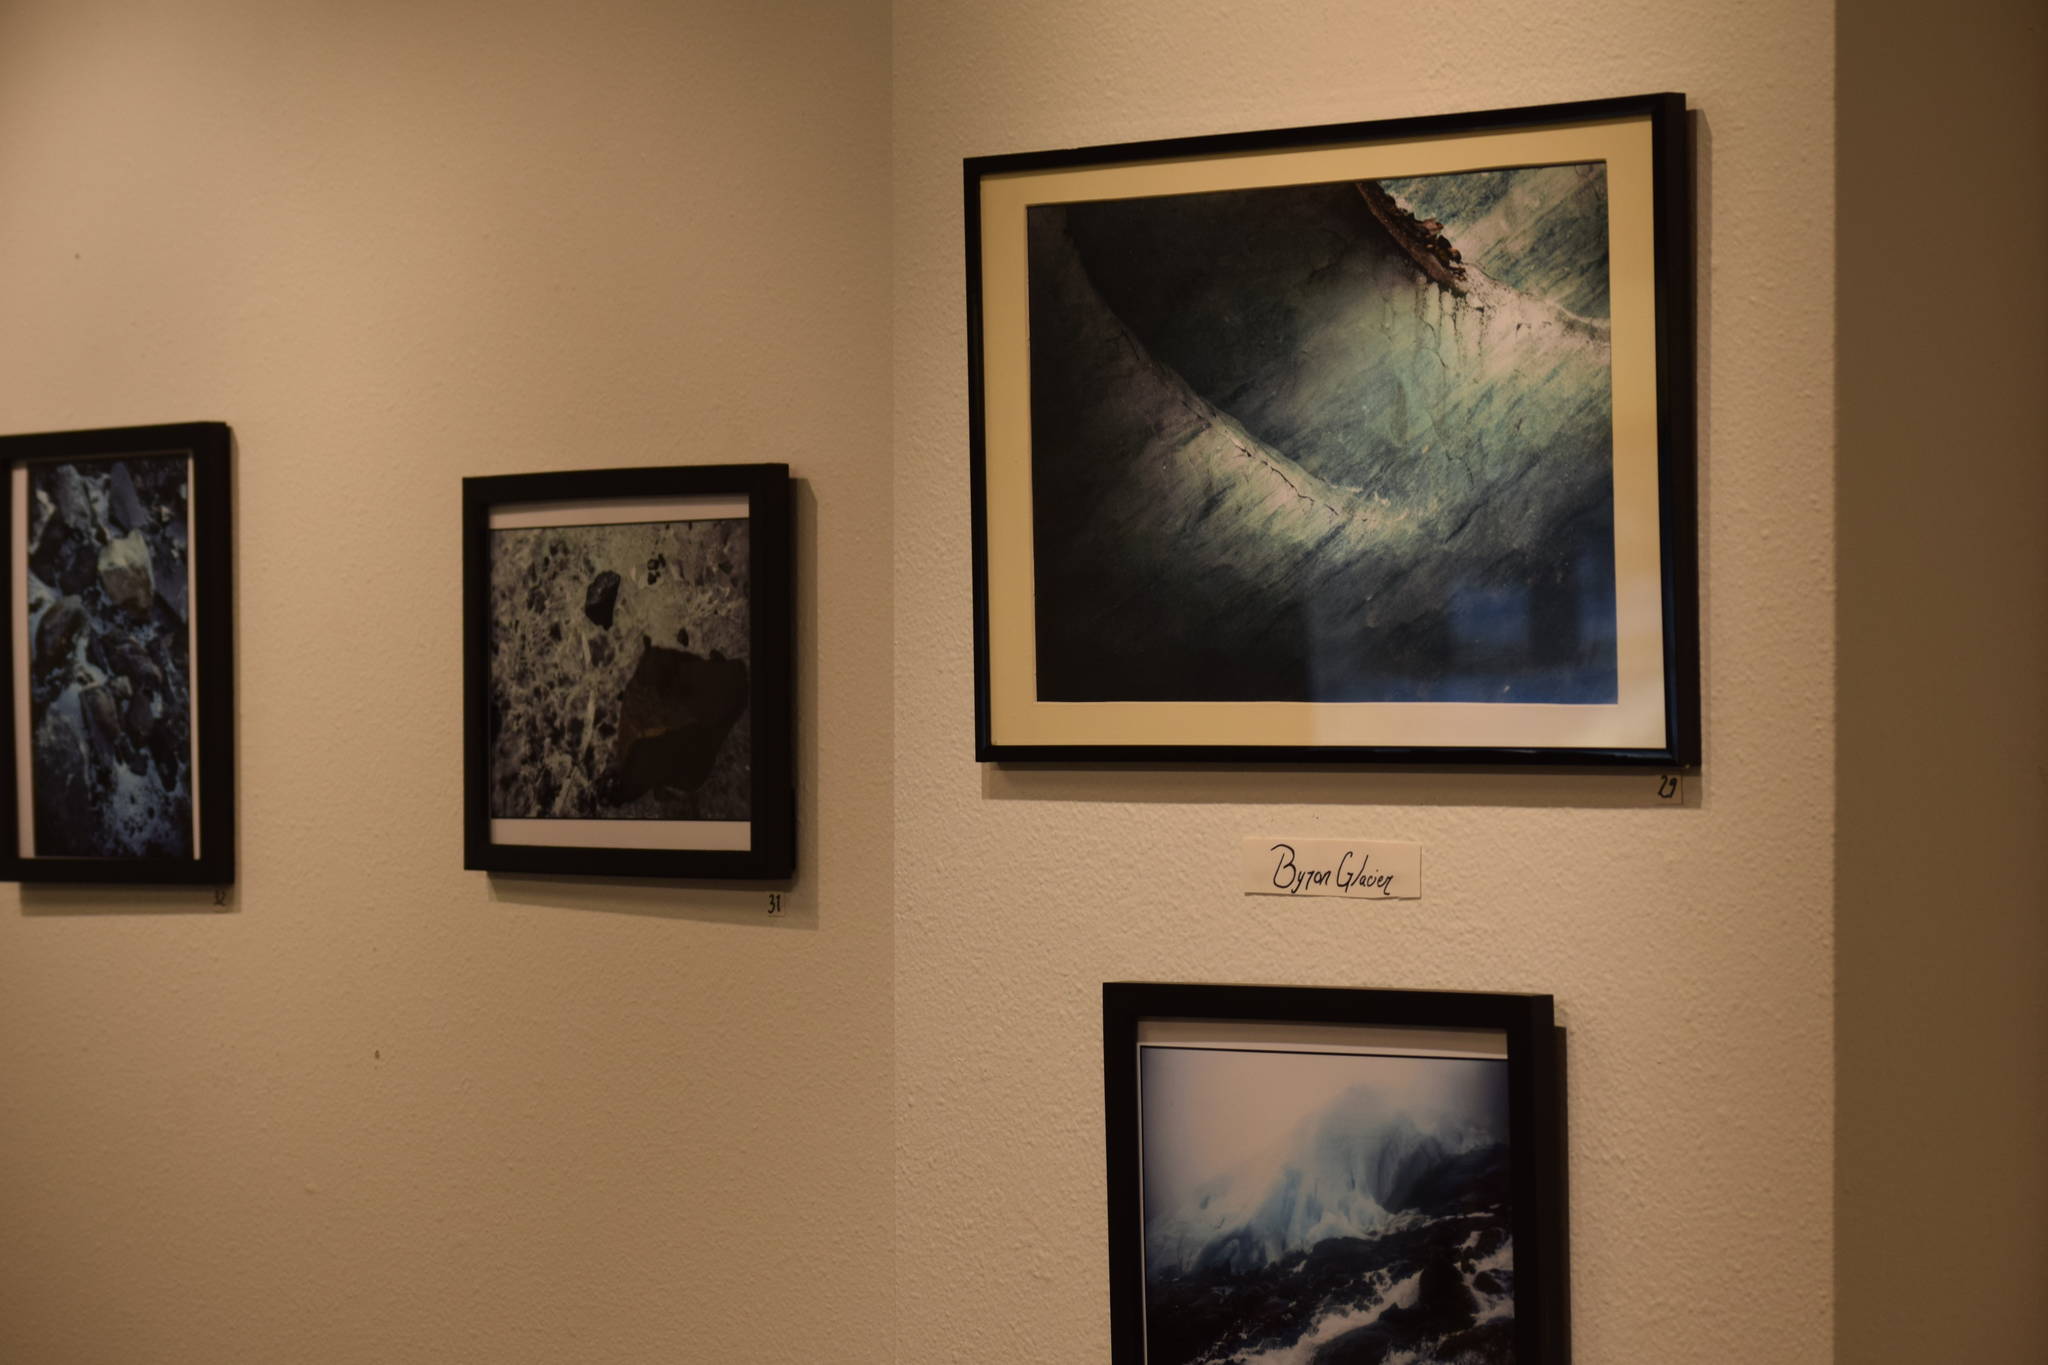 An image from the upcoming photography show features some of the work of Ben Boettger and Elizabeth Earl on display at the Kenai Fine Arts Center on Wednesday January 2, 2019. (Photo by Brian Mazurek/Peninsula Clarion)